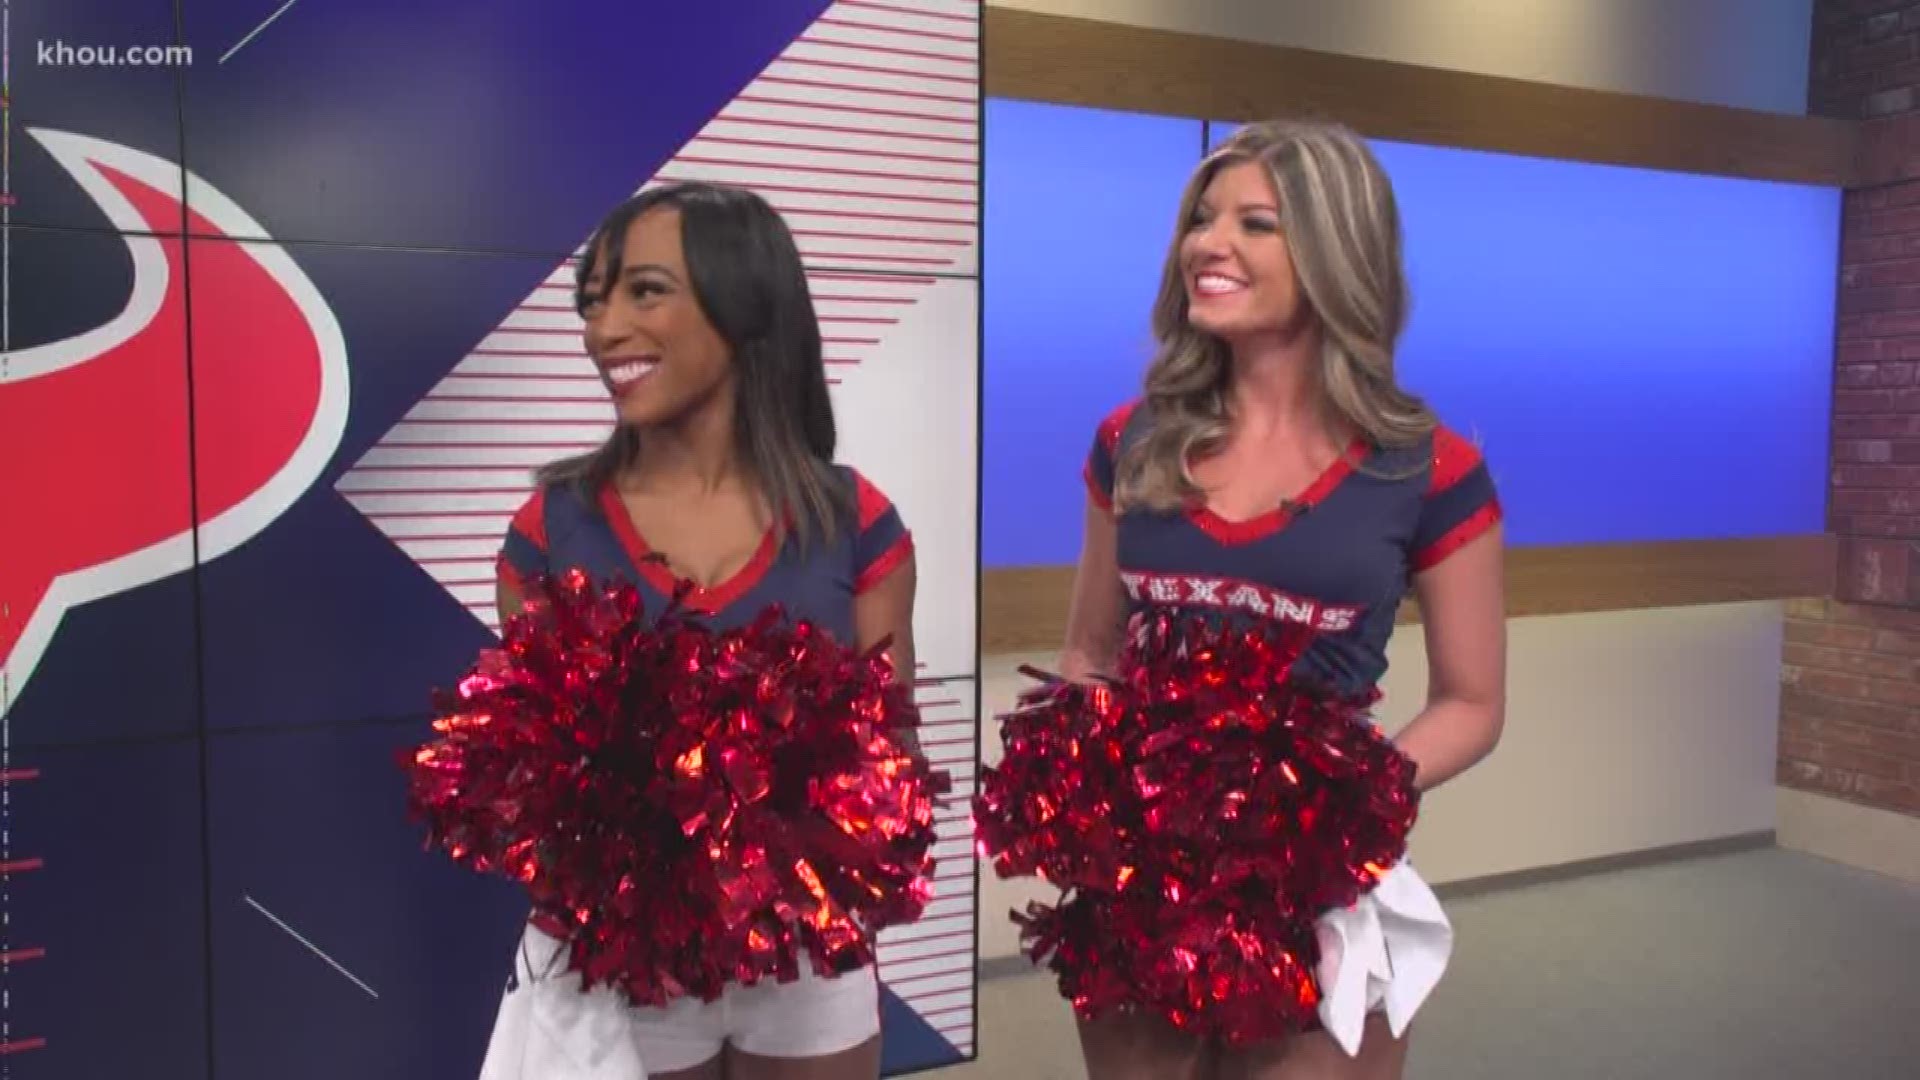 Texans Cheerleaders, Amani and Natalie, are with Shern-min Chow in the KHOU 11 studios talking about the halftime show at Saturday's playoff game against the Colts.